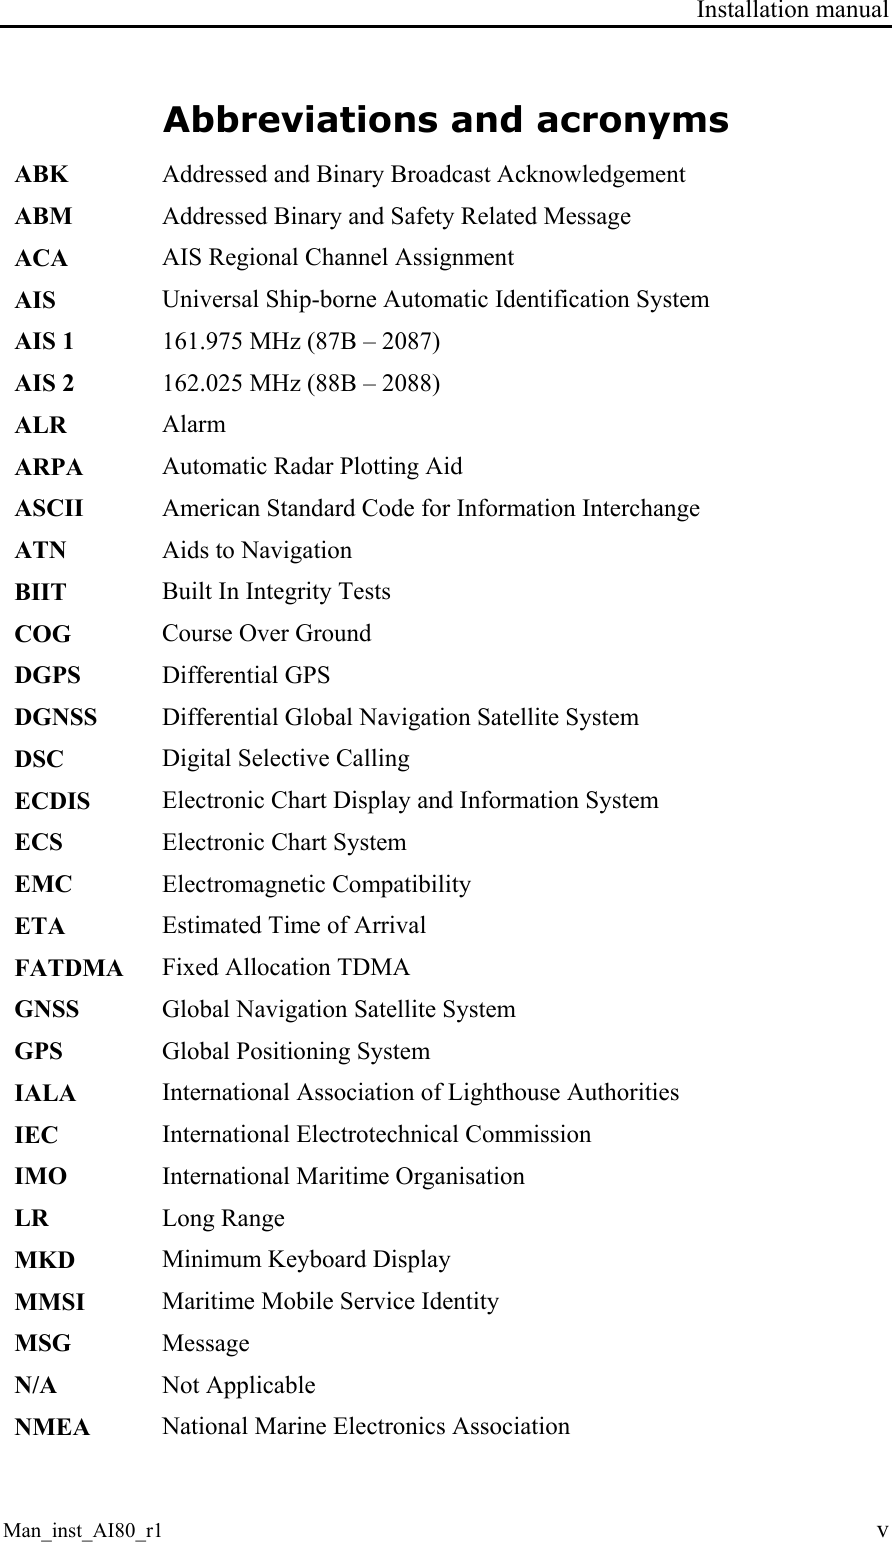 Installation manual Man_inst_AI80_r1 v Abbreviations and acronyms ABK  Addressed and Binary Broadcast Acknowledgement ABM  Addressed Binary and Safety Related Message ACA  AIS Regional Channel Assignment AIS  Universal Ship-borne Automatic Identification System AIS 1  161.975 MHz (87B – 2087) AIS 2  162.025 MHz (88B – 2088) ALR  Alarm ARPA  Automatic Radar Plotting Aid ASCII  American Standard Code for Information Interchange ATN  Aids to Navigation BIIT  Built In Integrity Tests COG  Course Over Ground DGPS  Differential GPS DGNSS  Differential Global Navigation Satellite System DSC  Digital Selective Calling ECDIS  Electronic Chart Display and Information System ECS  Electronic Chart System EMC  Electromagnetic Compatibility ETA  Estimated Time of Arrival FATDMA  Fixed Allocation TDMA GNSS  Global Navigation Satellite System GPS  Global Positioning System IALA  International Association of Lighthouse Authorities IEC  International Electrotechnical Commission IMO  International Maritime Organisation LR  Long Range MKD  Minimum Keyboard Display MMSI  Maritime Mobile Service Identity MSG  Message N/A  Not Applicable NMEA  National Marine Electronics Association 